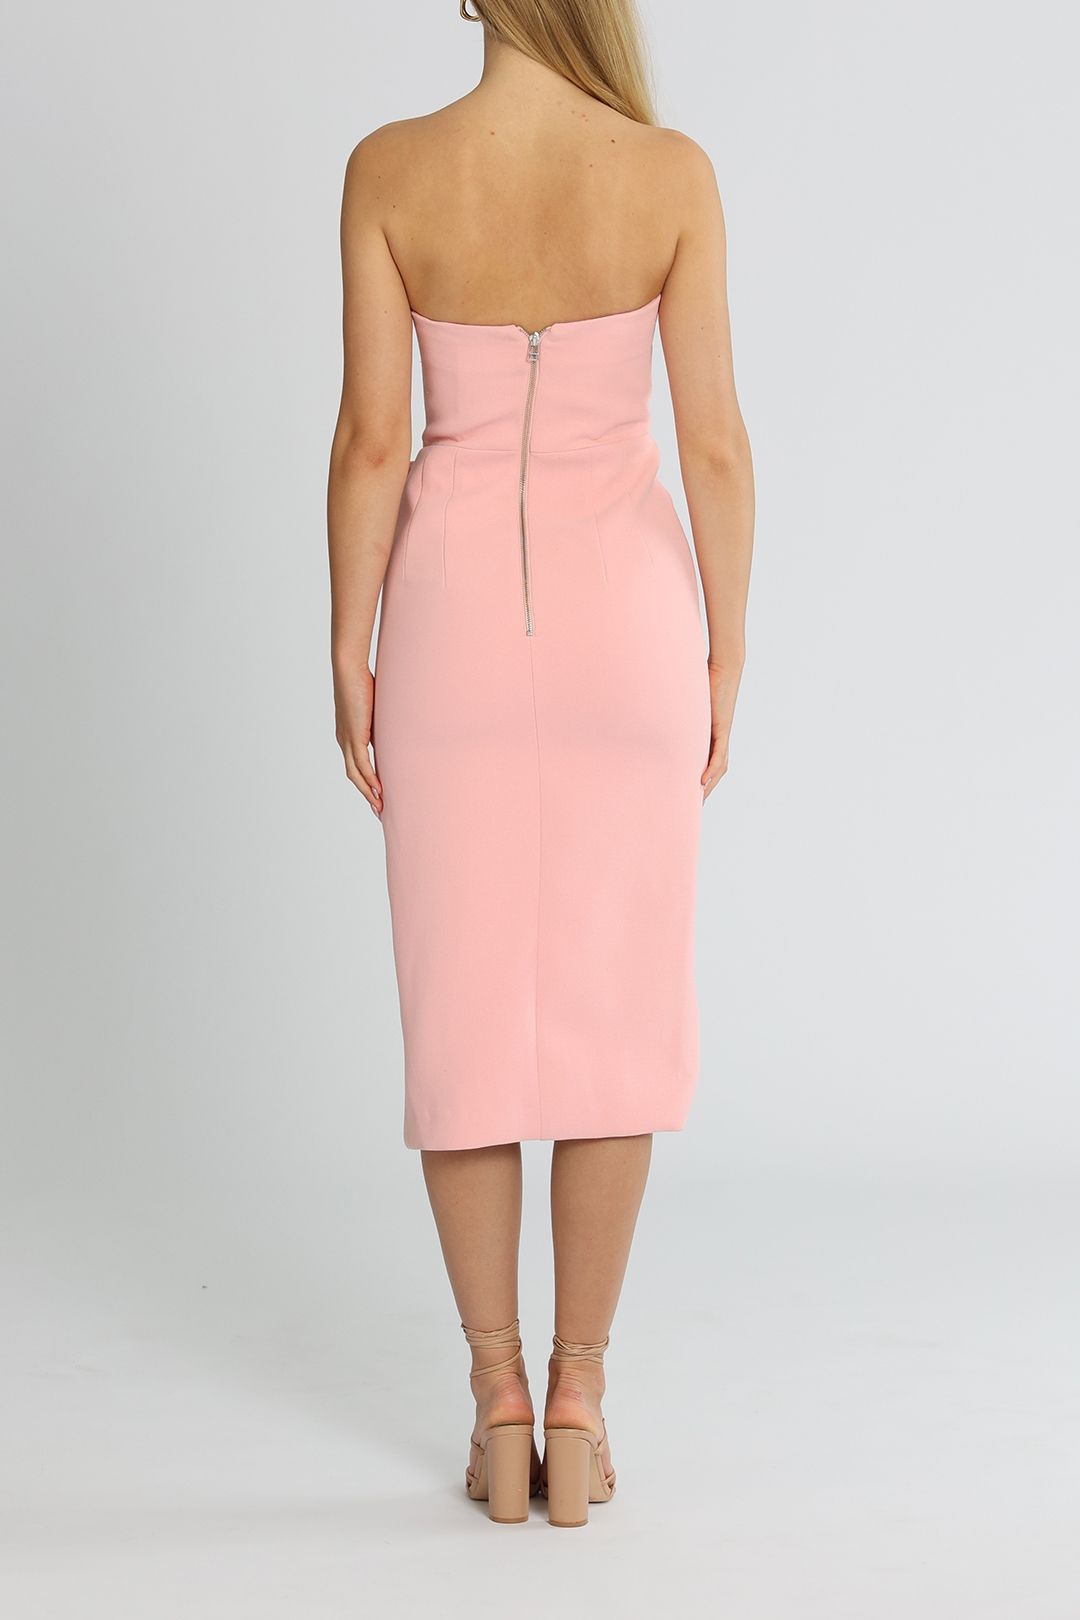 By Johnny Bow Tie Strapless Dress Pale Pink Bodycon